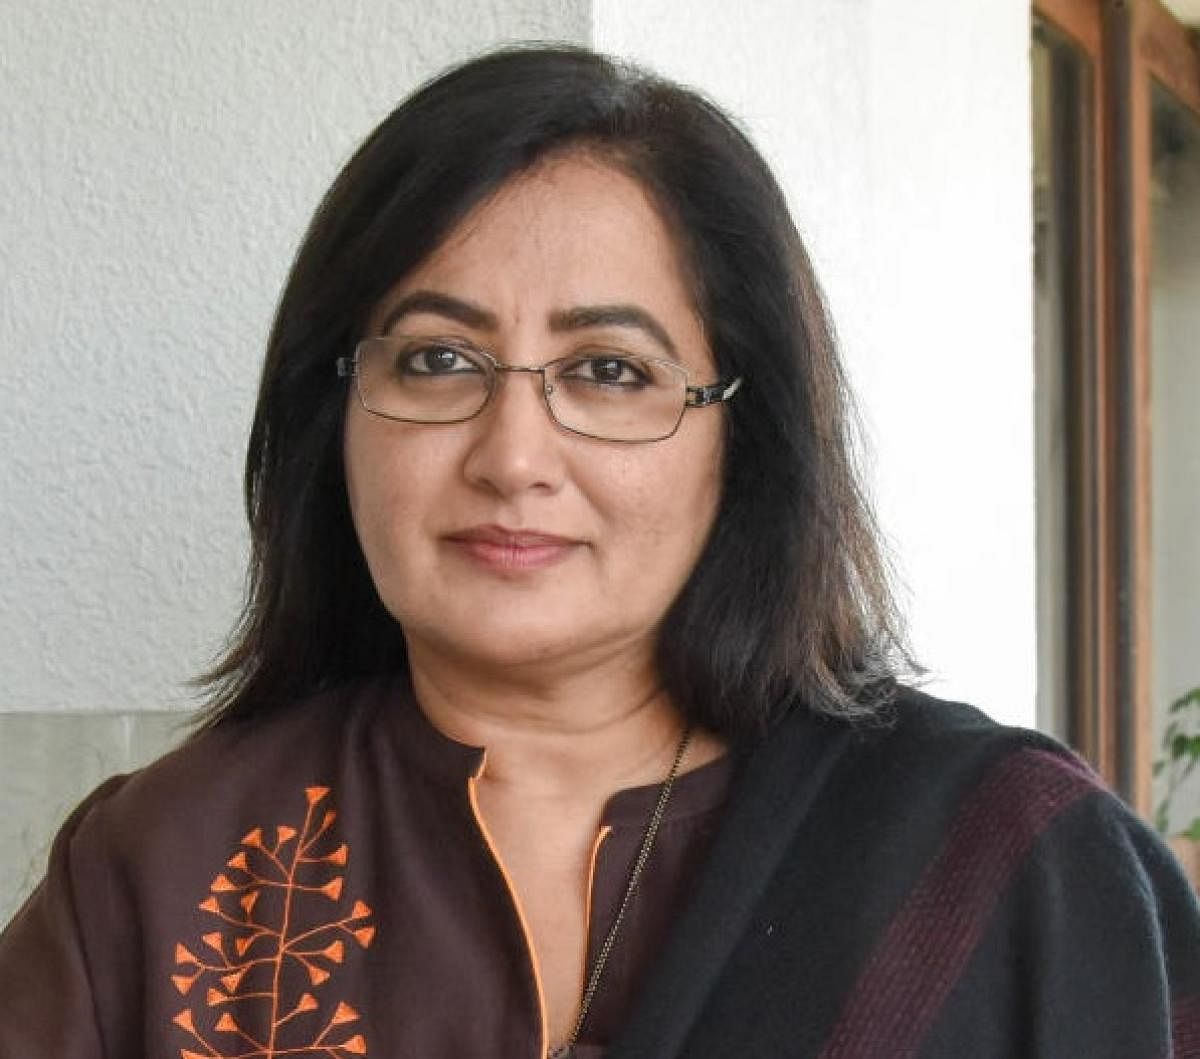 Sumalatha will have to slog to swing votes or match the vote share that the JD(S) has across all eight Assembly segments that fall under the Mandya Lok Sabha seat, data analyzed by DH show.